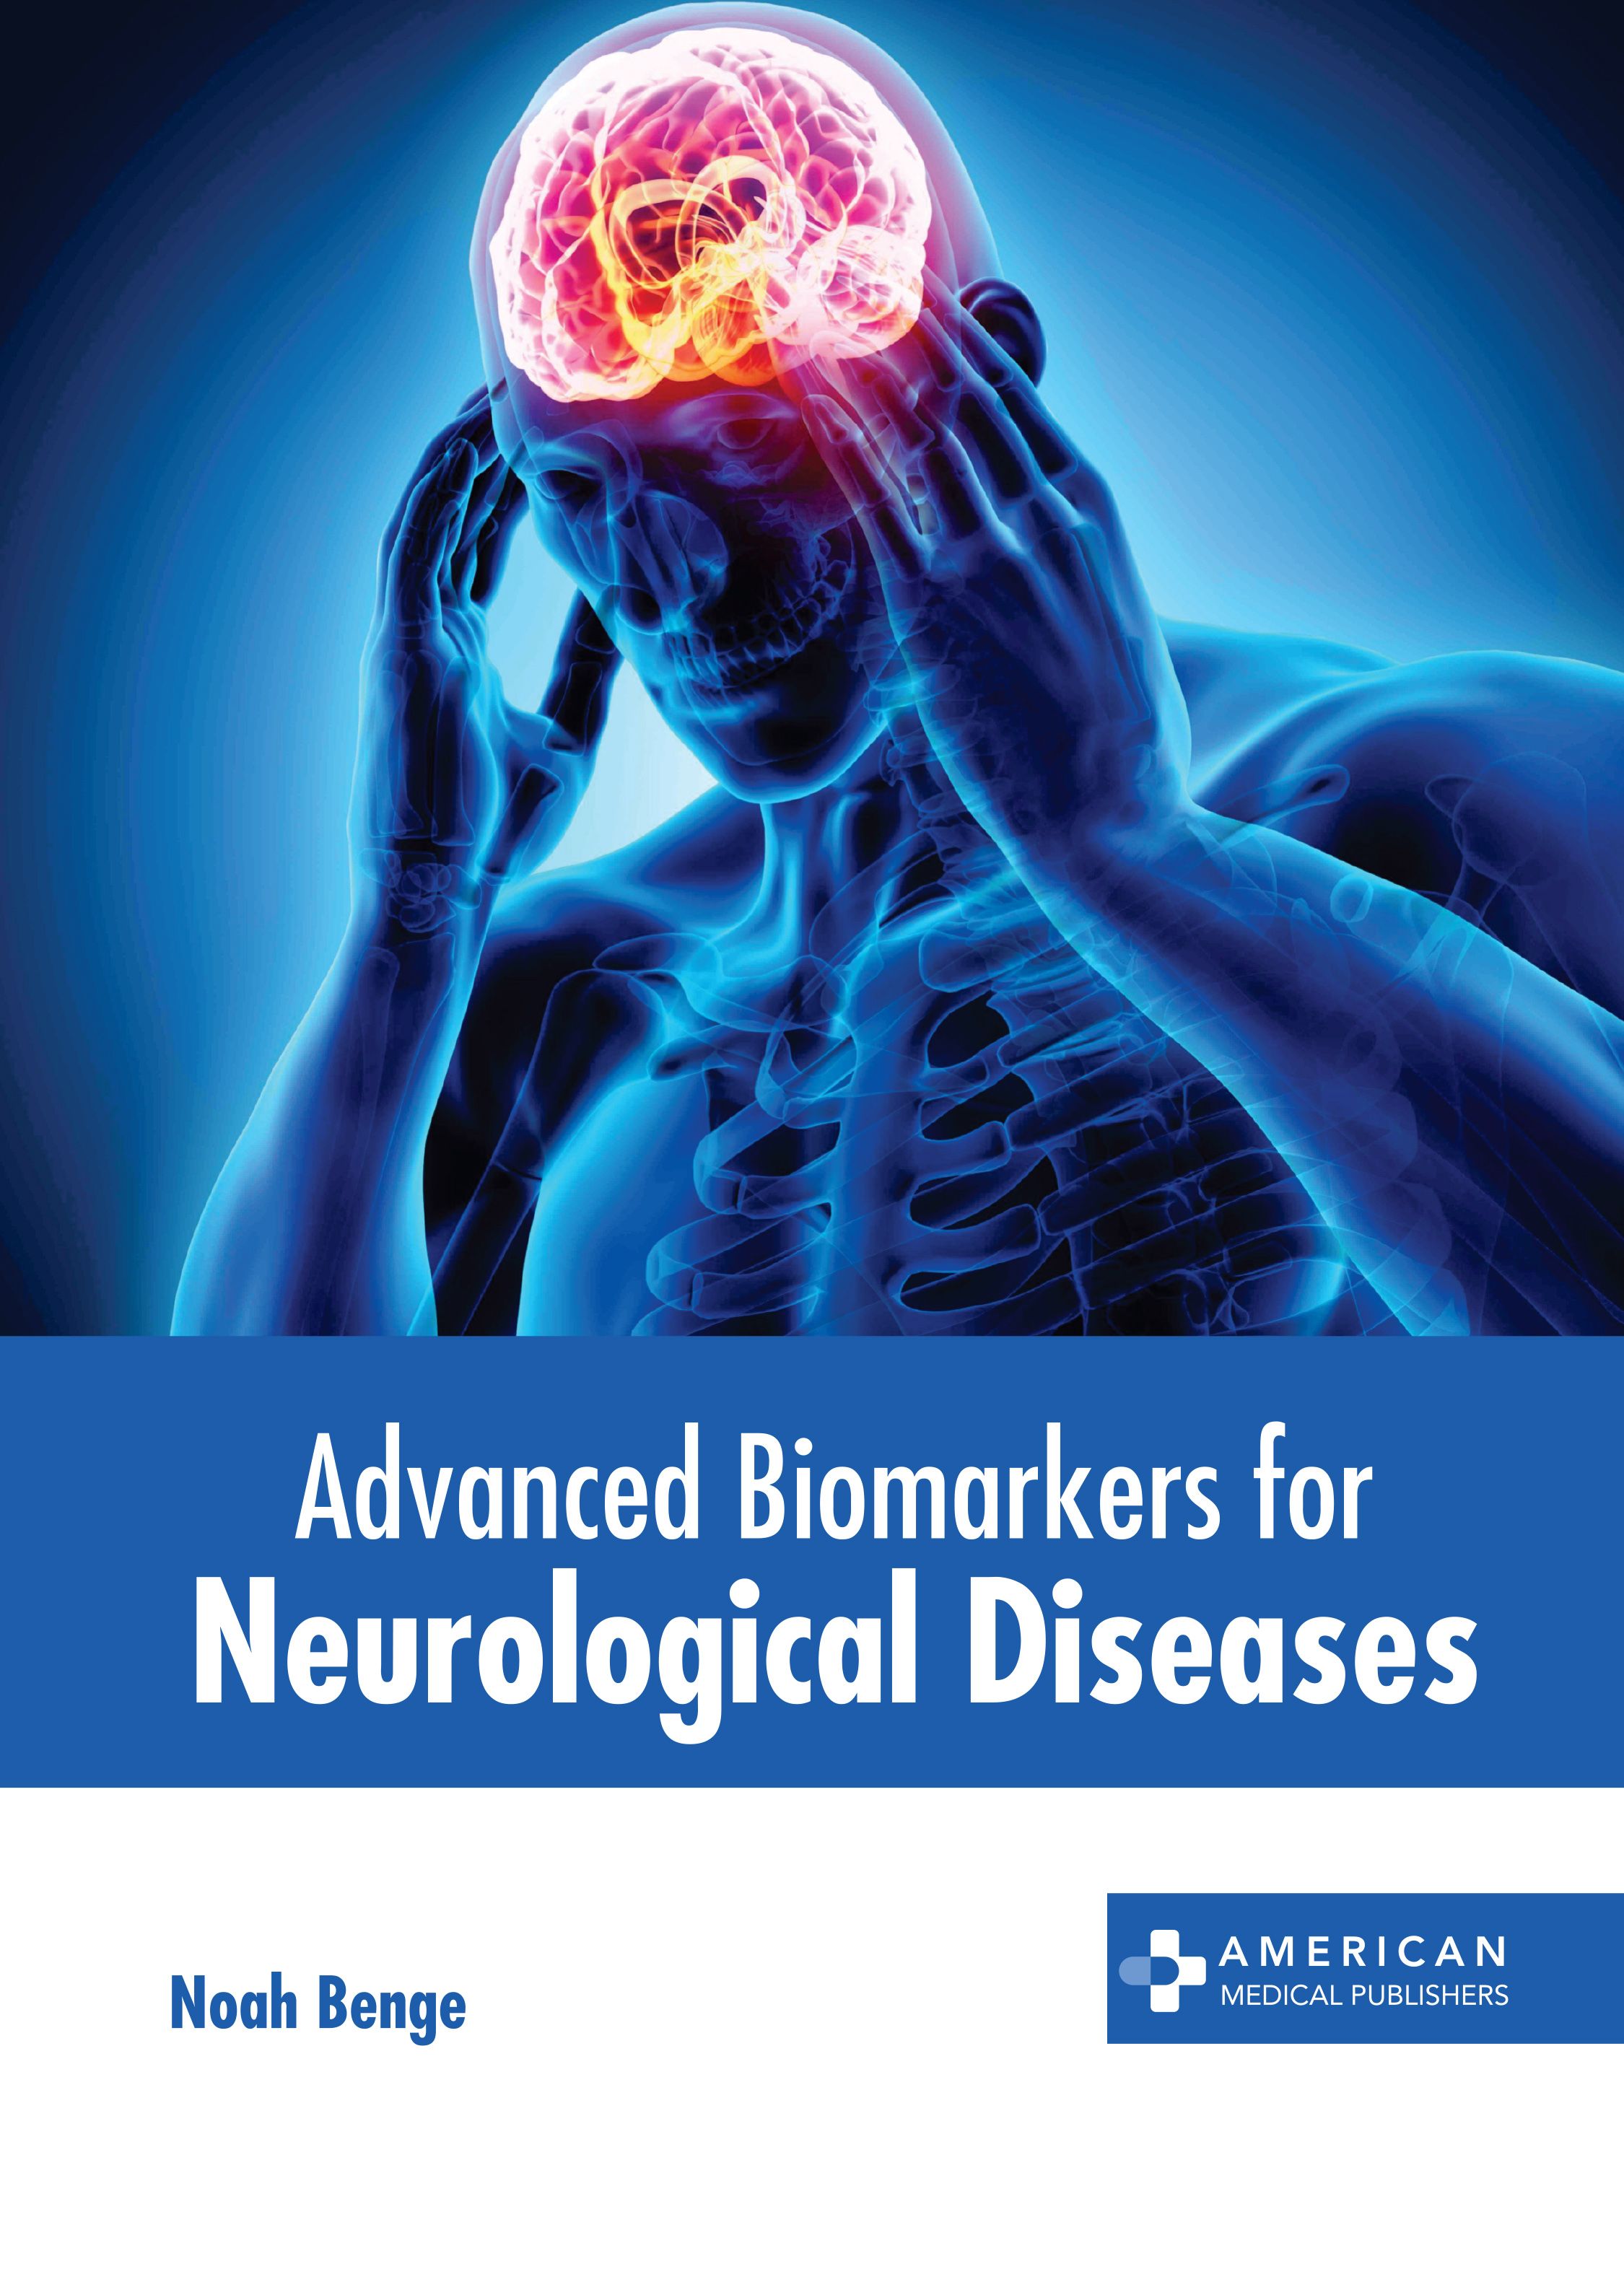 ADVANCED BIOMARKERS FOR NEUROLOGICAL DISEASES